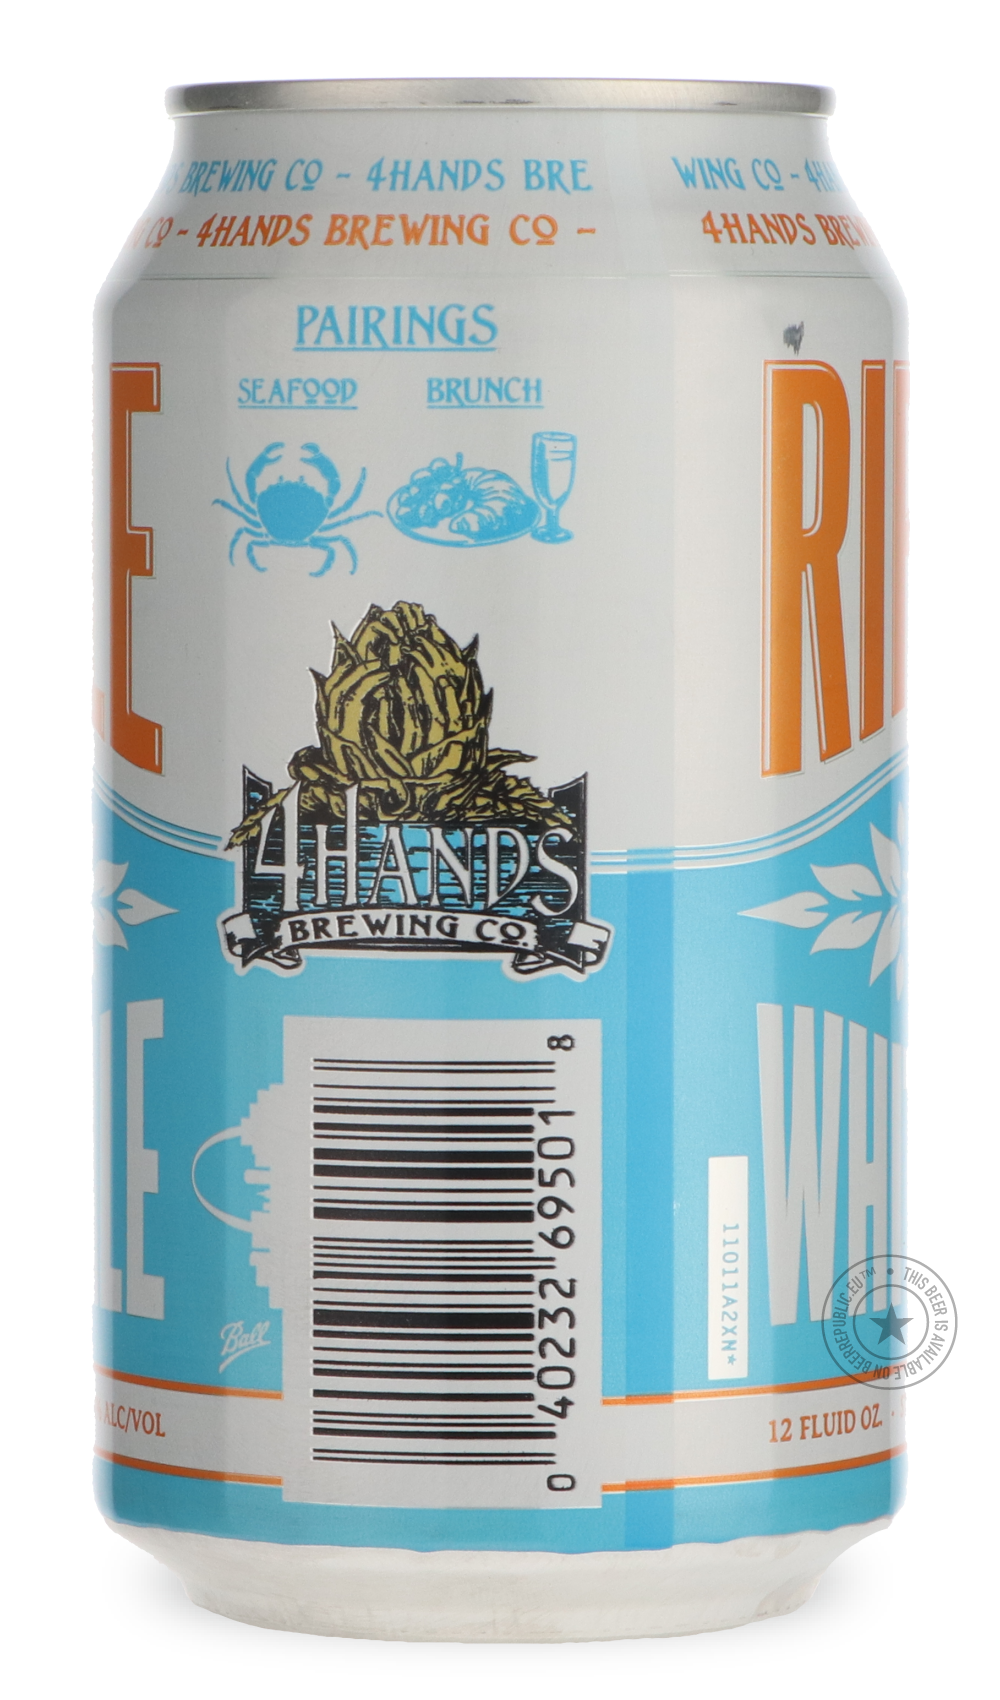 -4 Hands- Ripple White Ale-Pale- Only @ Beer Republic - The best online beer store for American & Canadian craft beer - Buy beer online from the USA and Canada - Bier online kopen - Amerikaans bier kopen - Craft beer store - Craft beer kopen - Amerikanisch bier kaufen - Bier online kaufen - Acheter biere online - IPA - Stout - Porter - New England IPA - Hazy IPA - Imperial Stout - Barrel Aged - Barrel Aged Imperial Stout - Brown - Dark beer - Blond - Blonde - Pilsner - Lager - Wheat - Weizen - Amber - Barle